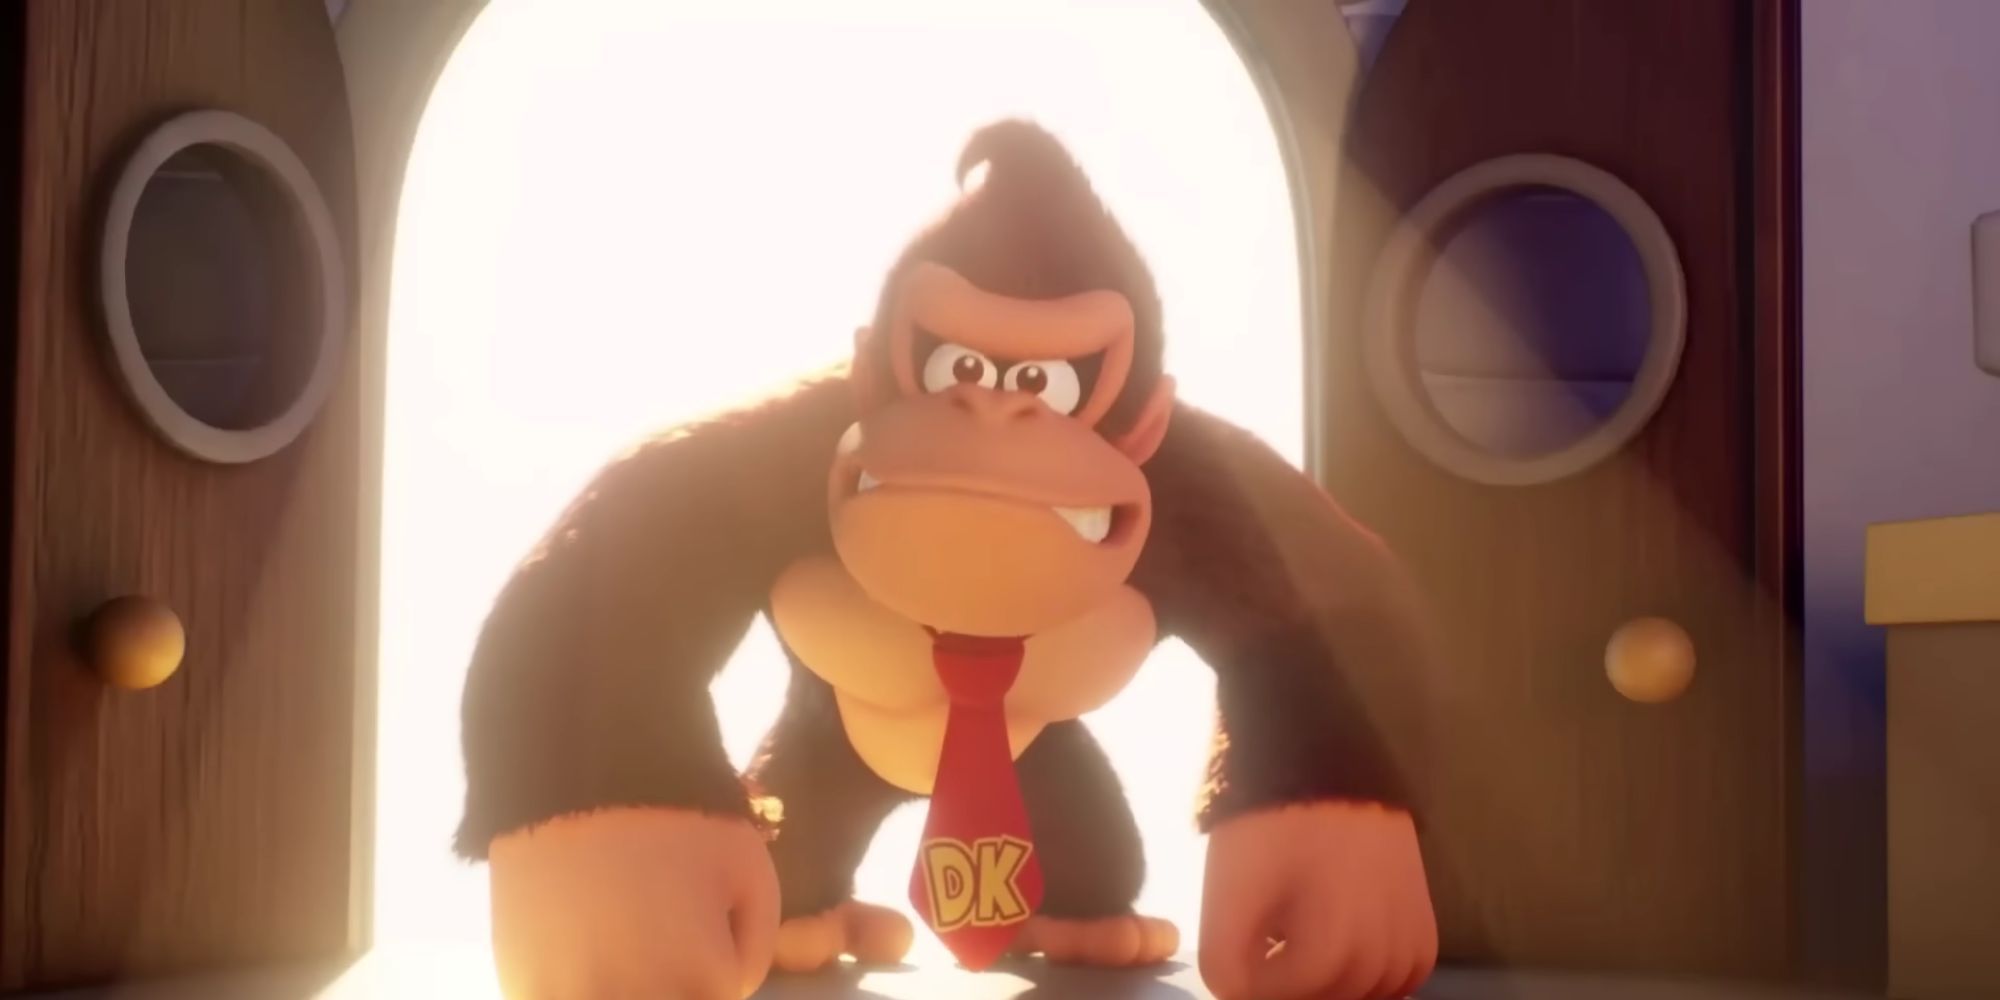 Donkey Kong in the intro for the Switch remake of Mario vs. Donkey Kong.